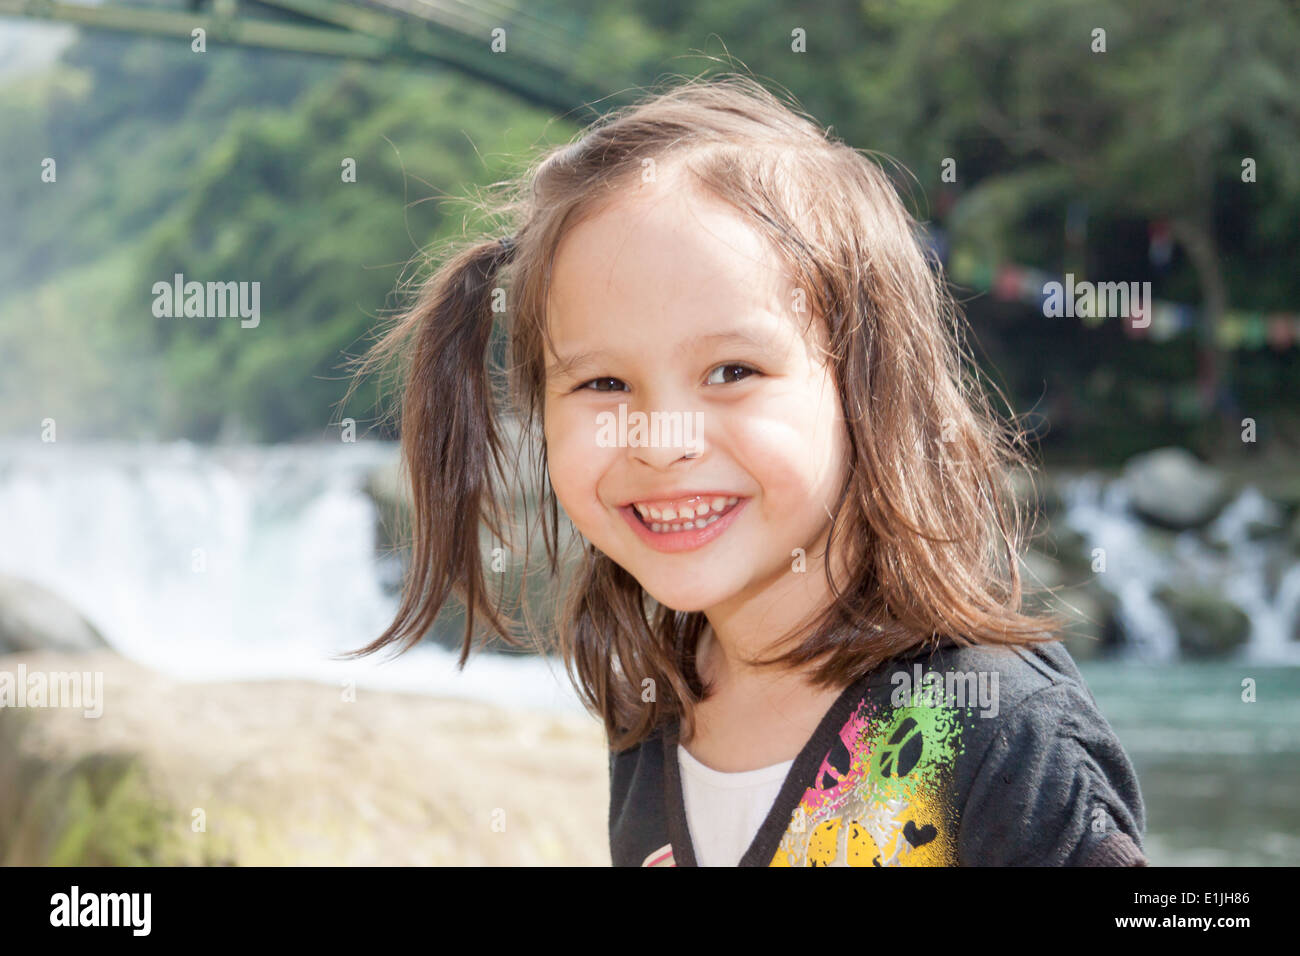 Child standing near a lake with waterfall in background Stock Photo